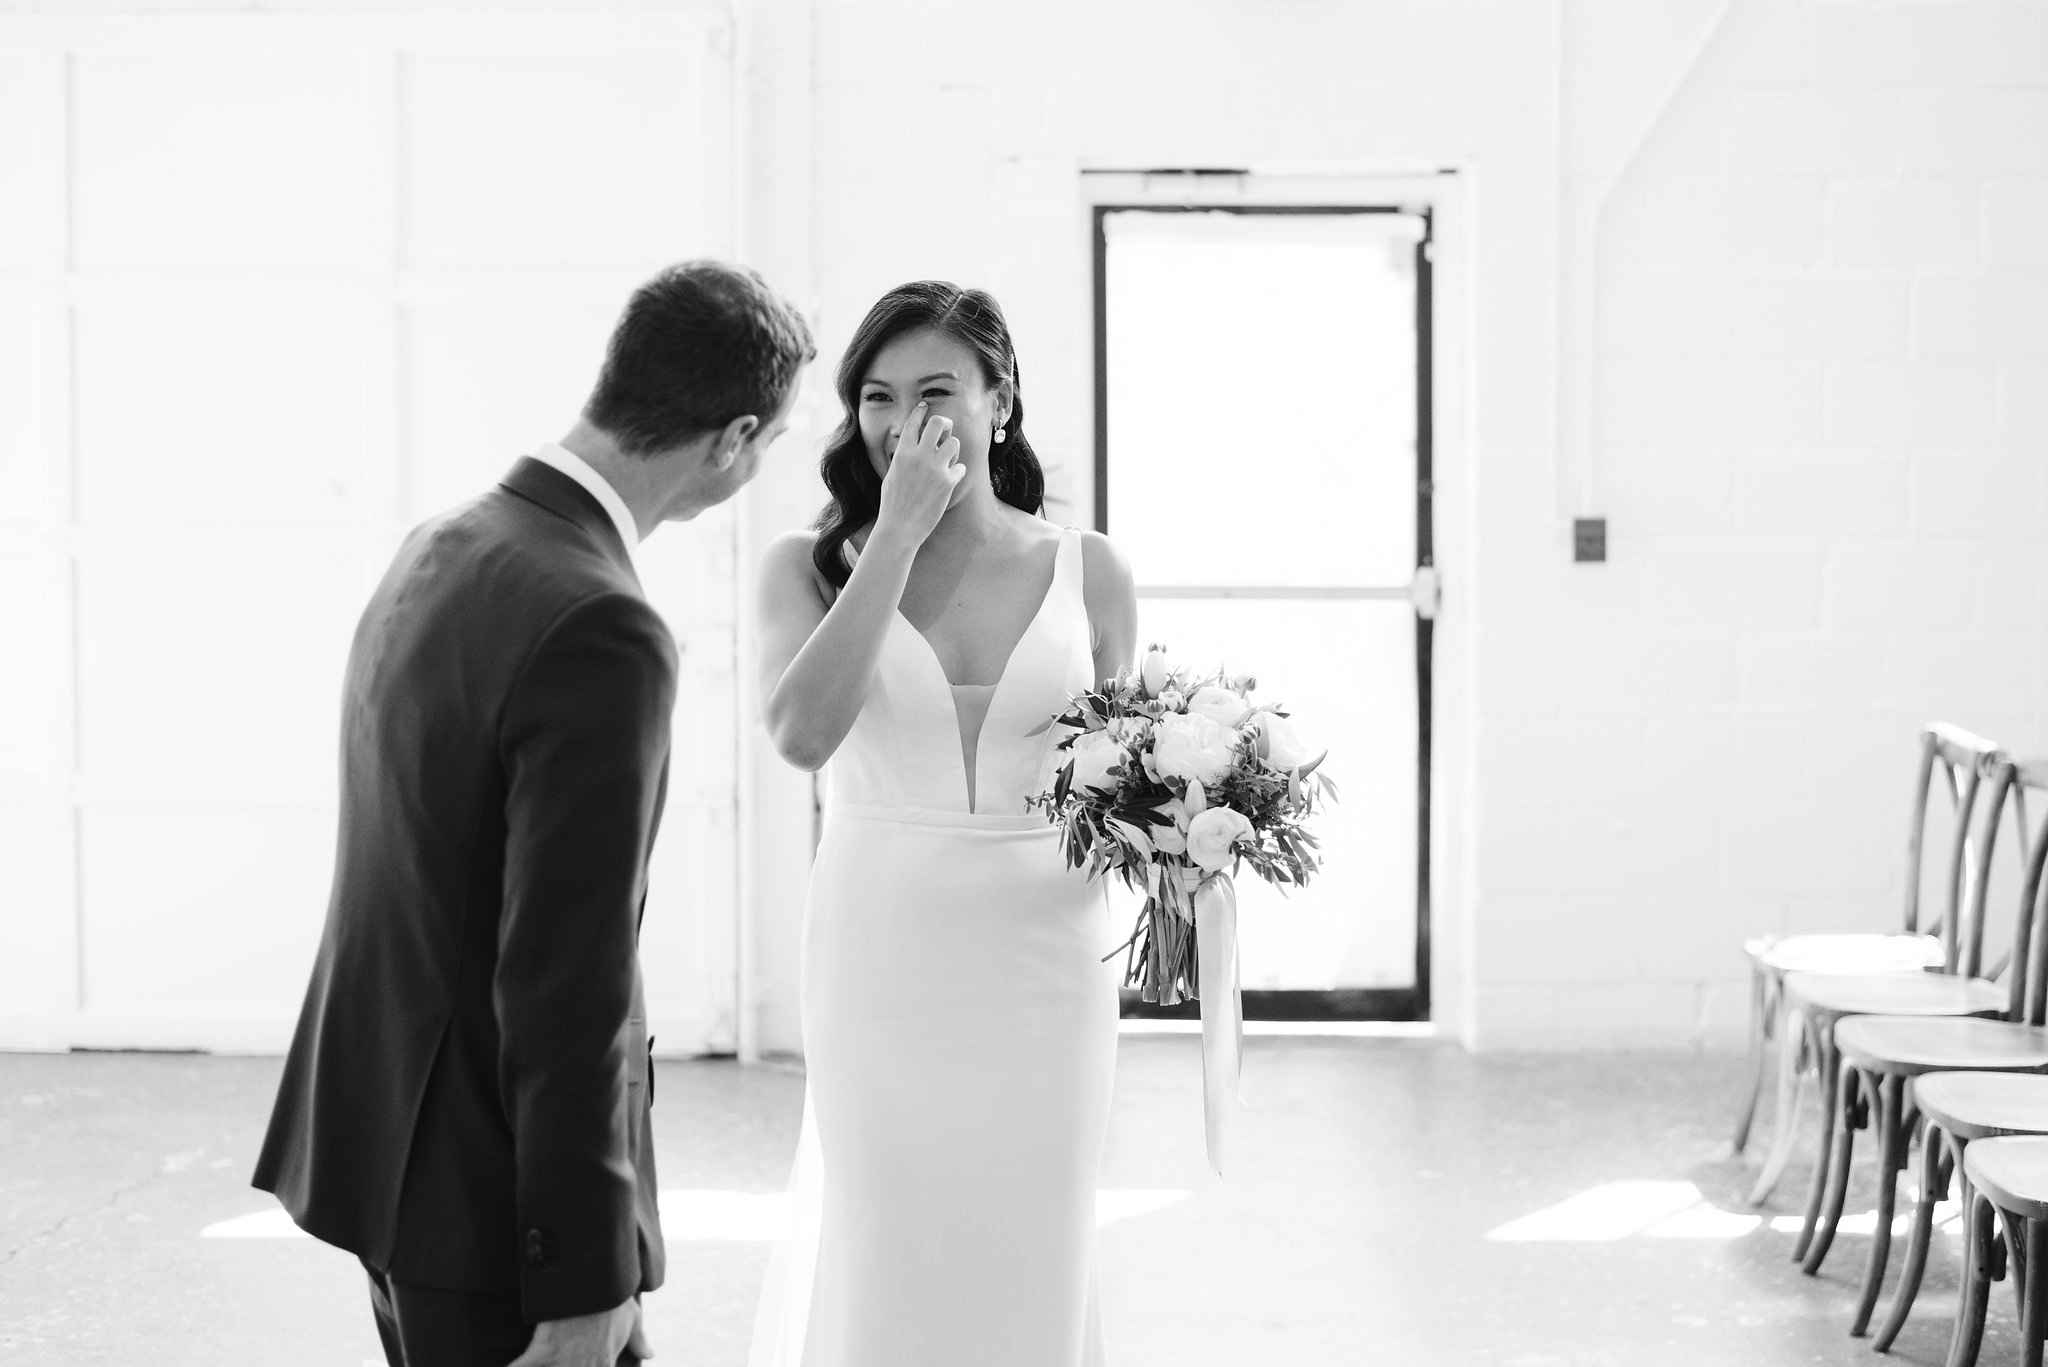 First Look - Olive Photography - Toronto wedding photographer